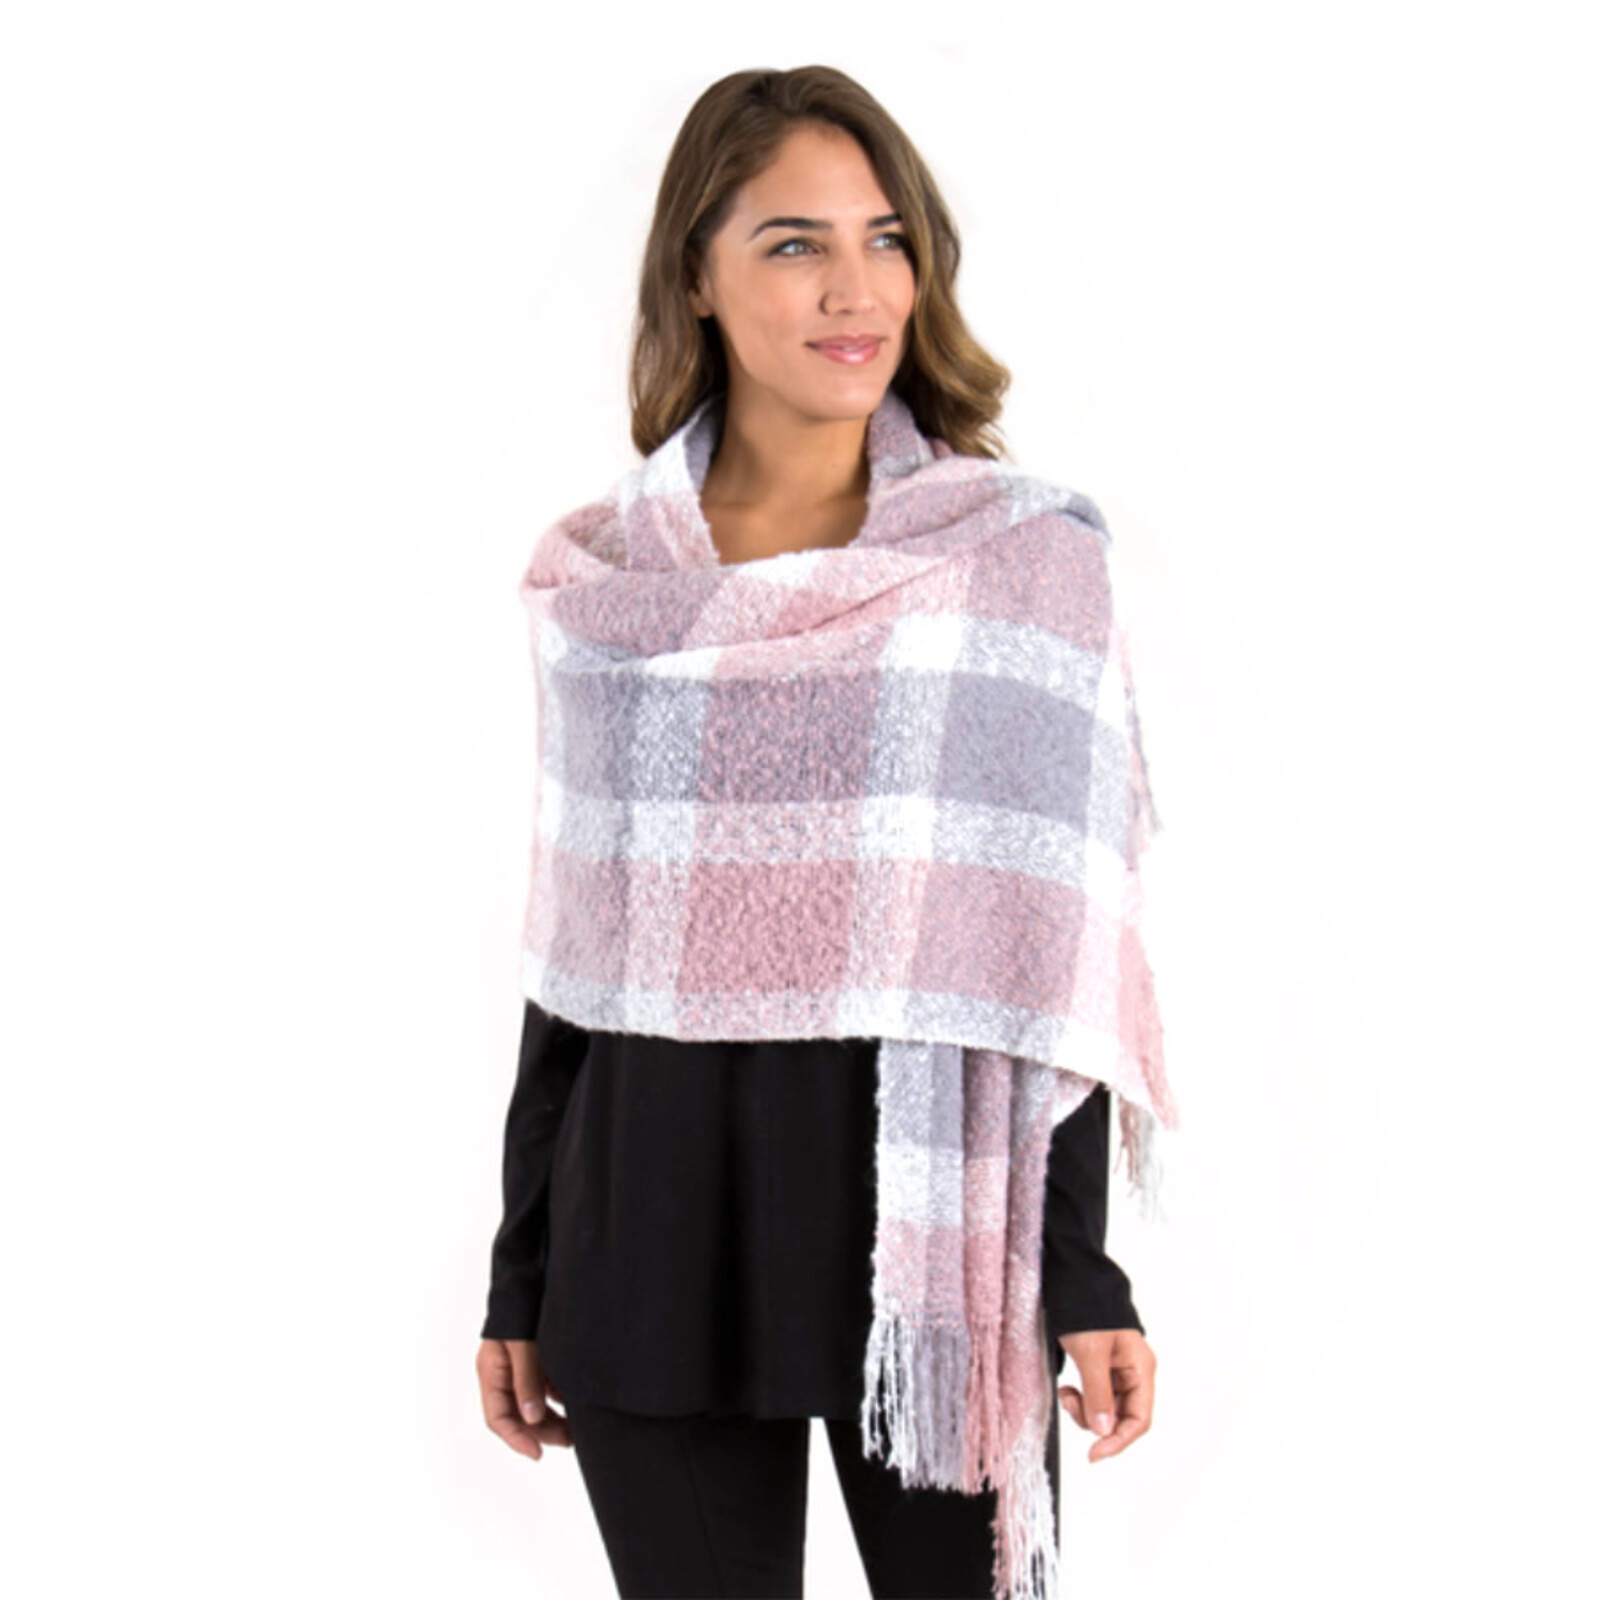 Simply Noelle Plaid Boxed Scarf/Wrap       SCV8010 loading=